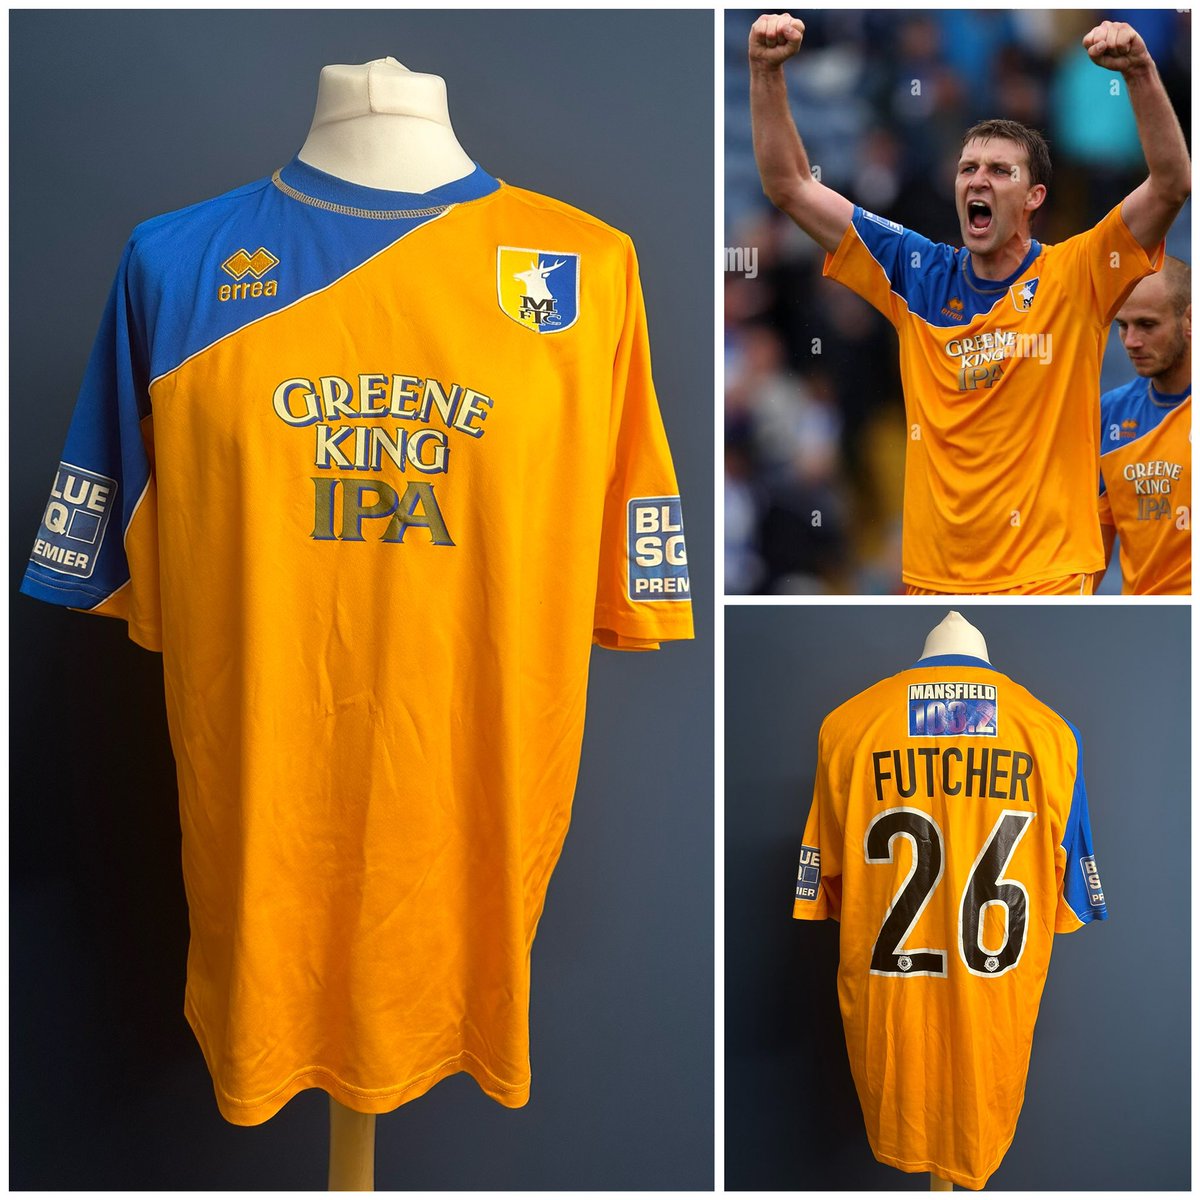 Another new arrival into the collection… Ben Futcher’s matchworn home shirt from 2011/12. Futcher joined @mansfieldtownfc on loan from Bury before later returning as David Flitcroft’s Assistant Manager in 2018.